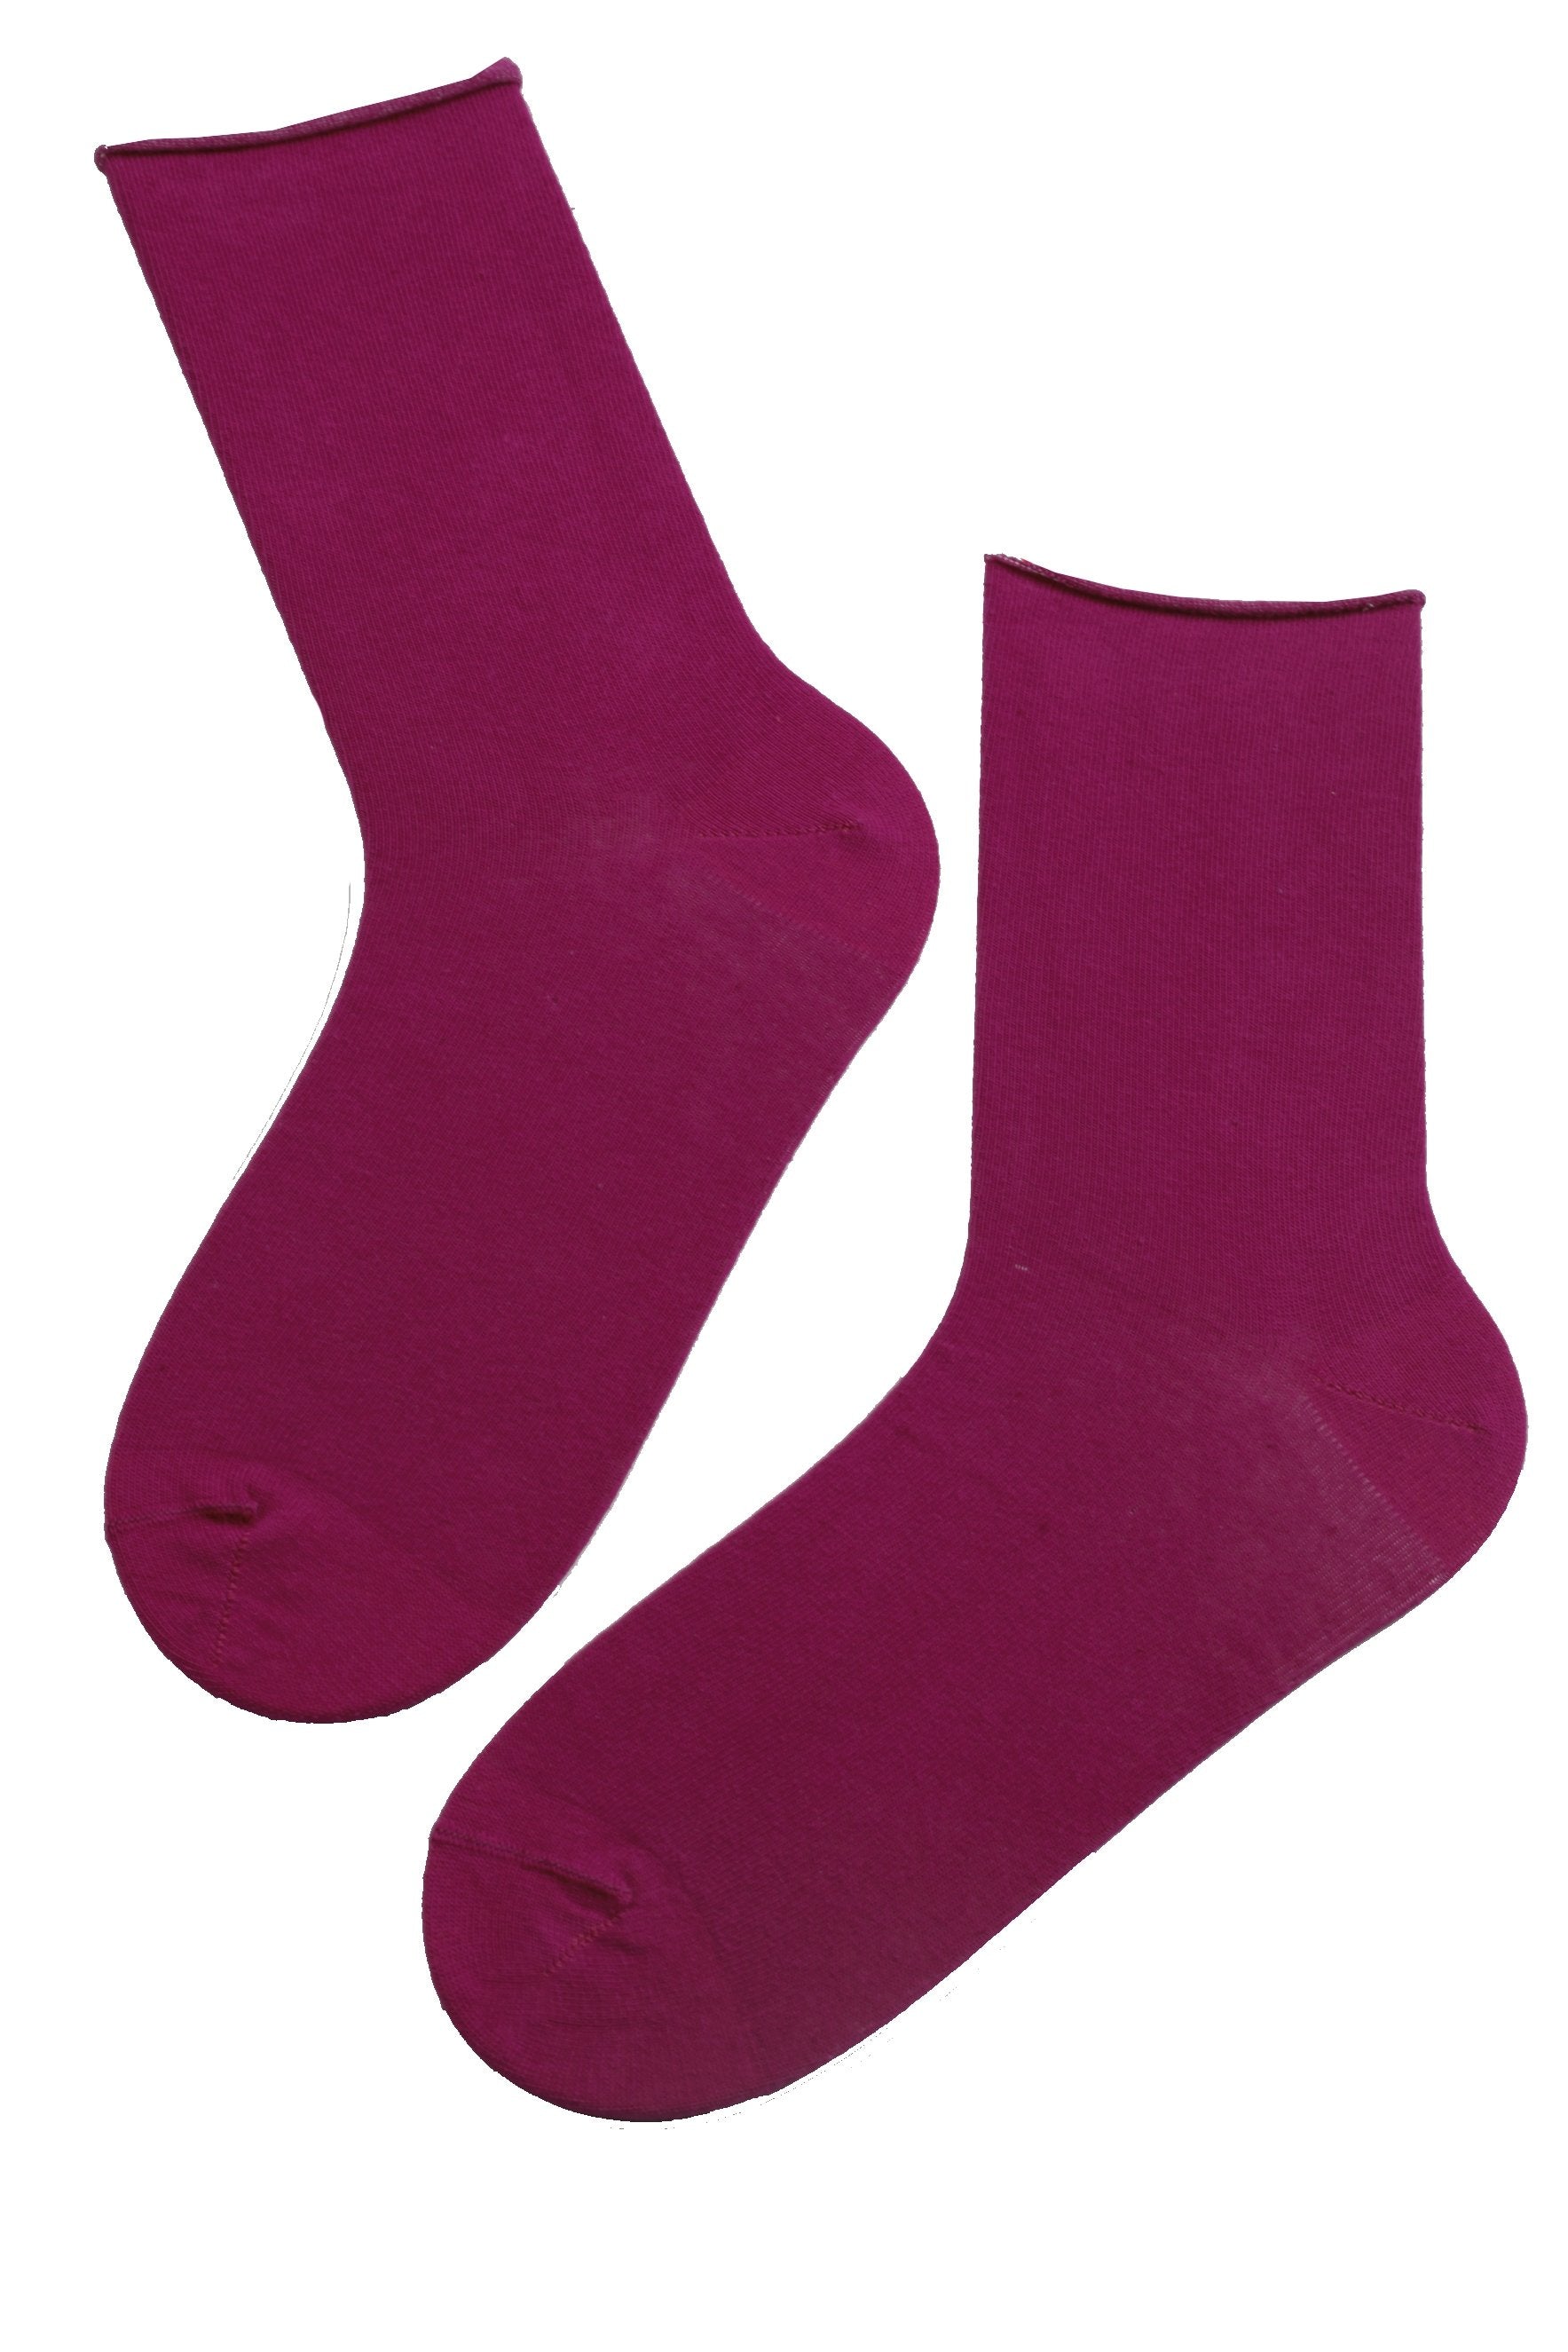 OLEV purple socks with a comfortable edge for men